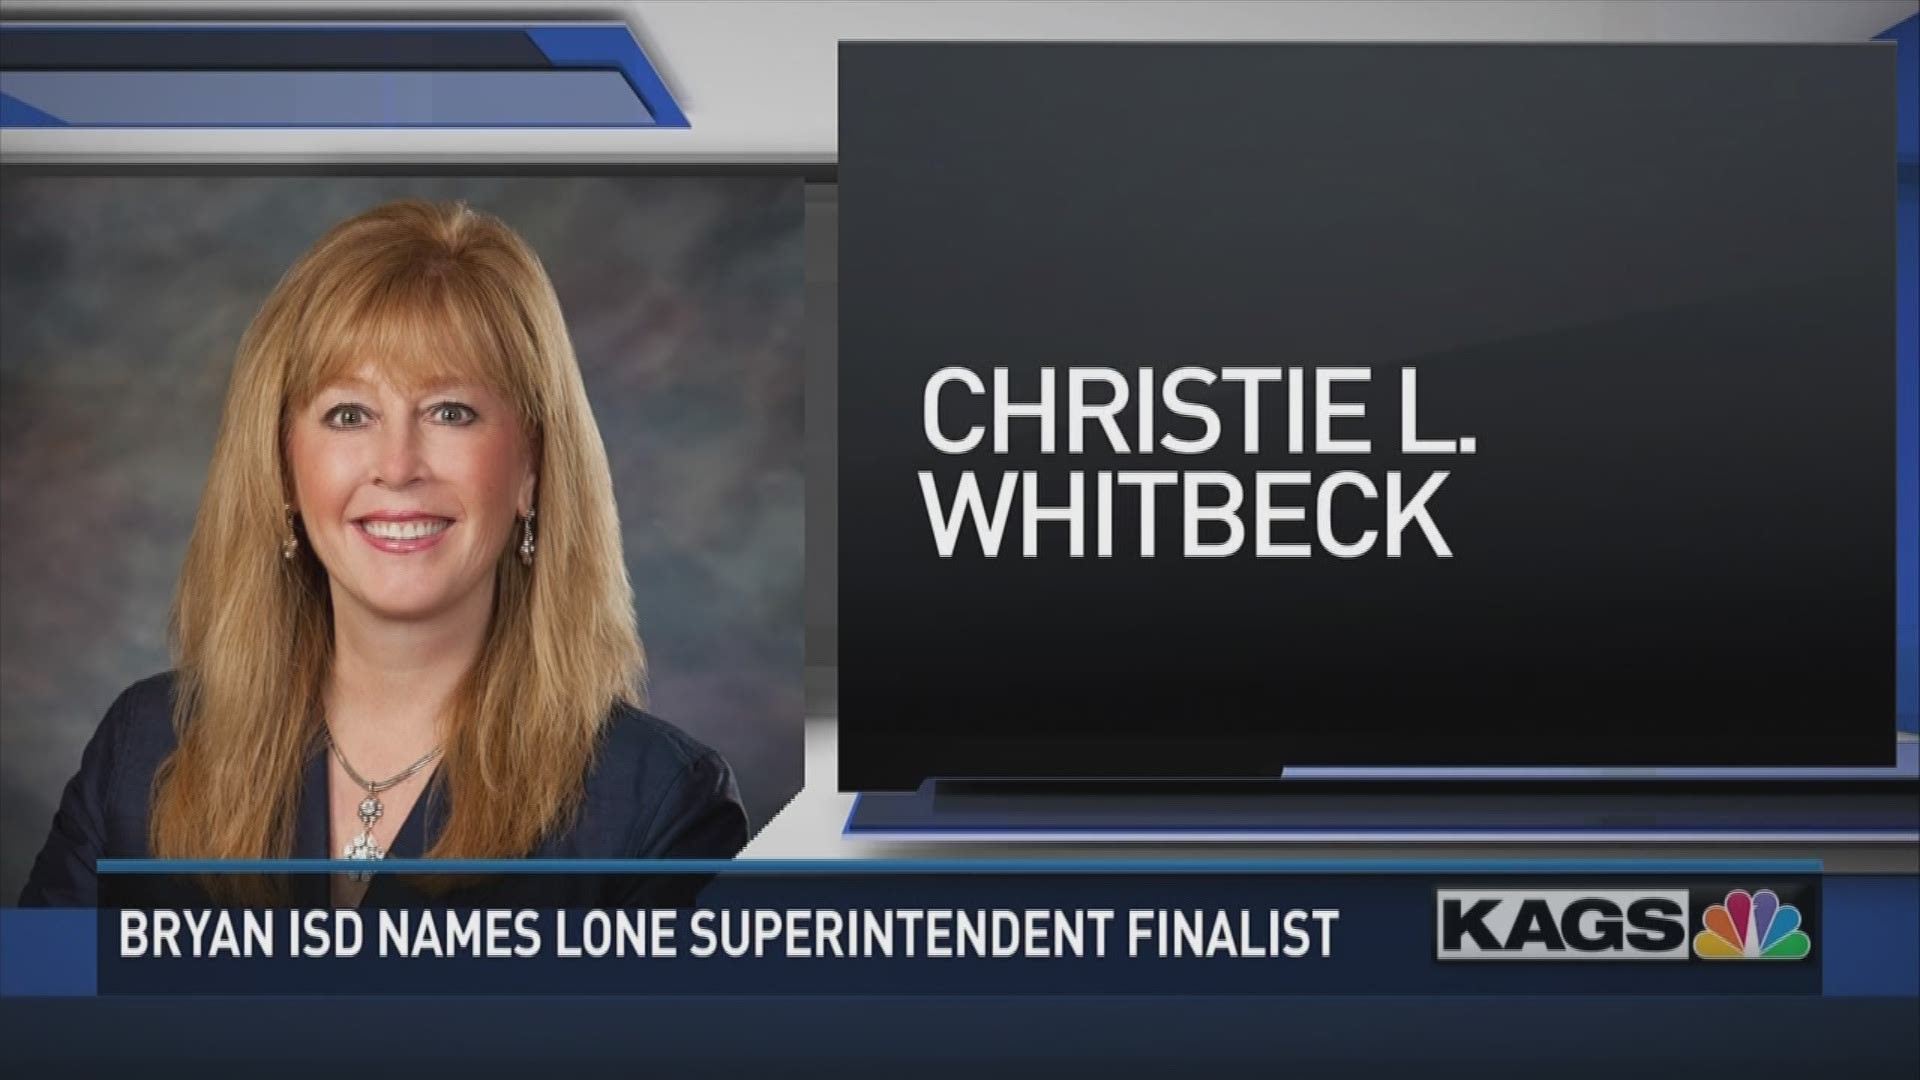 Christie Witbeck, currently working for Fort Bend ISD, named by the school board as the lone finalist for the superintendent position.